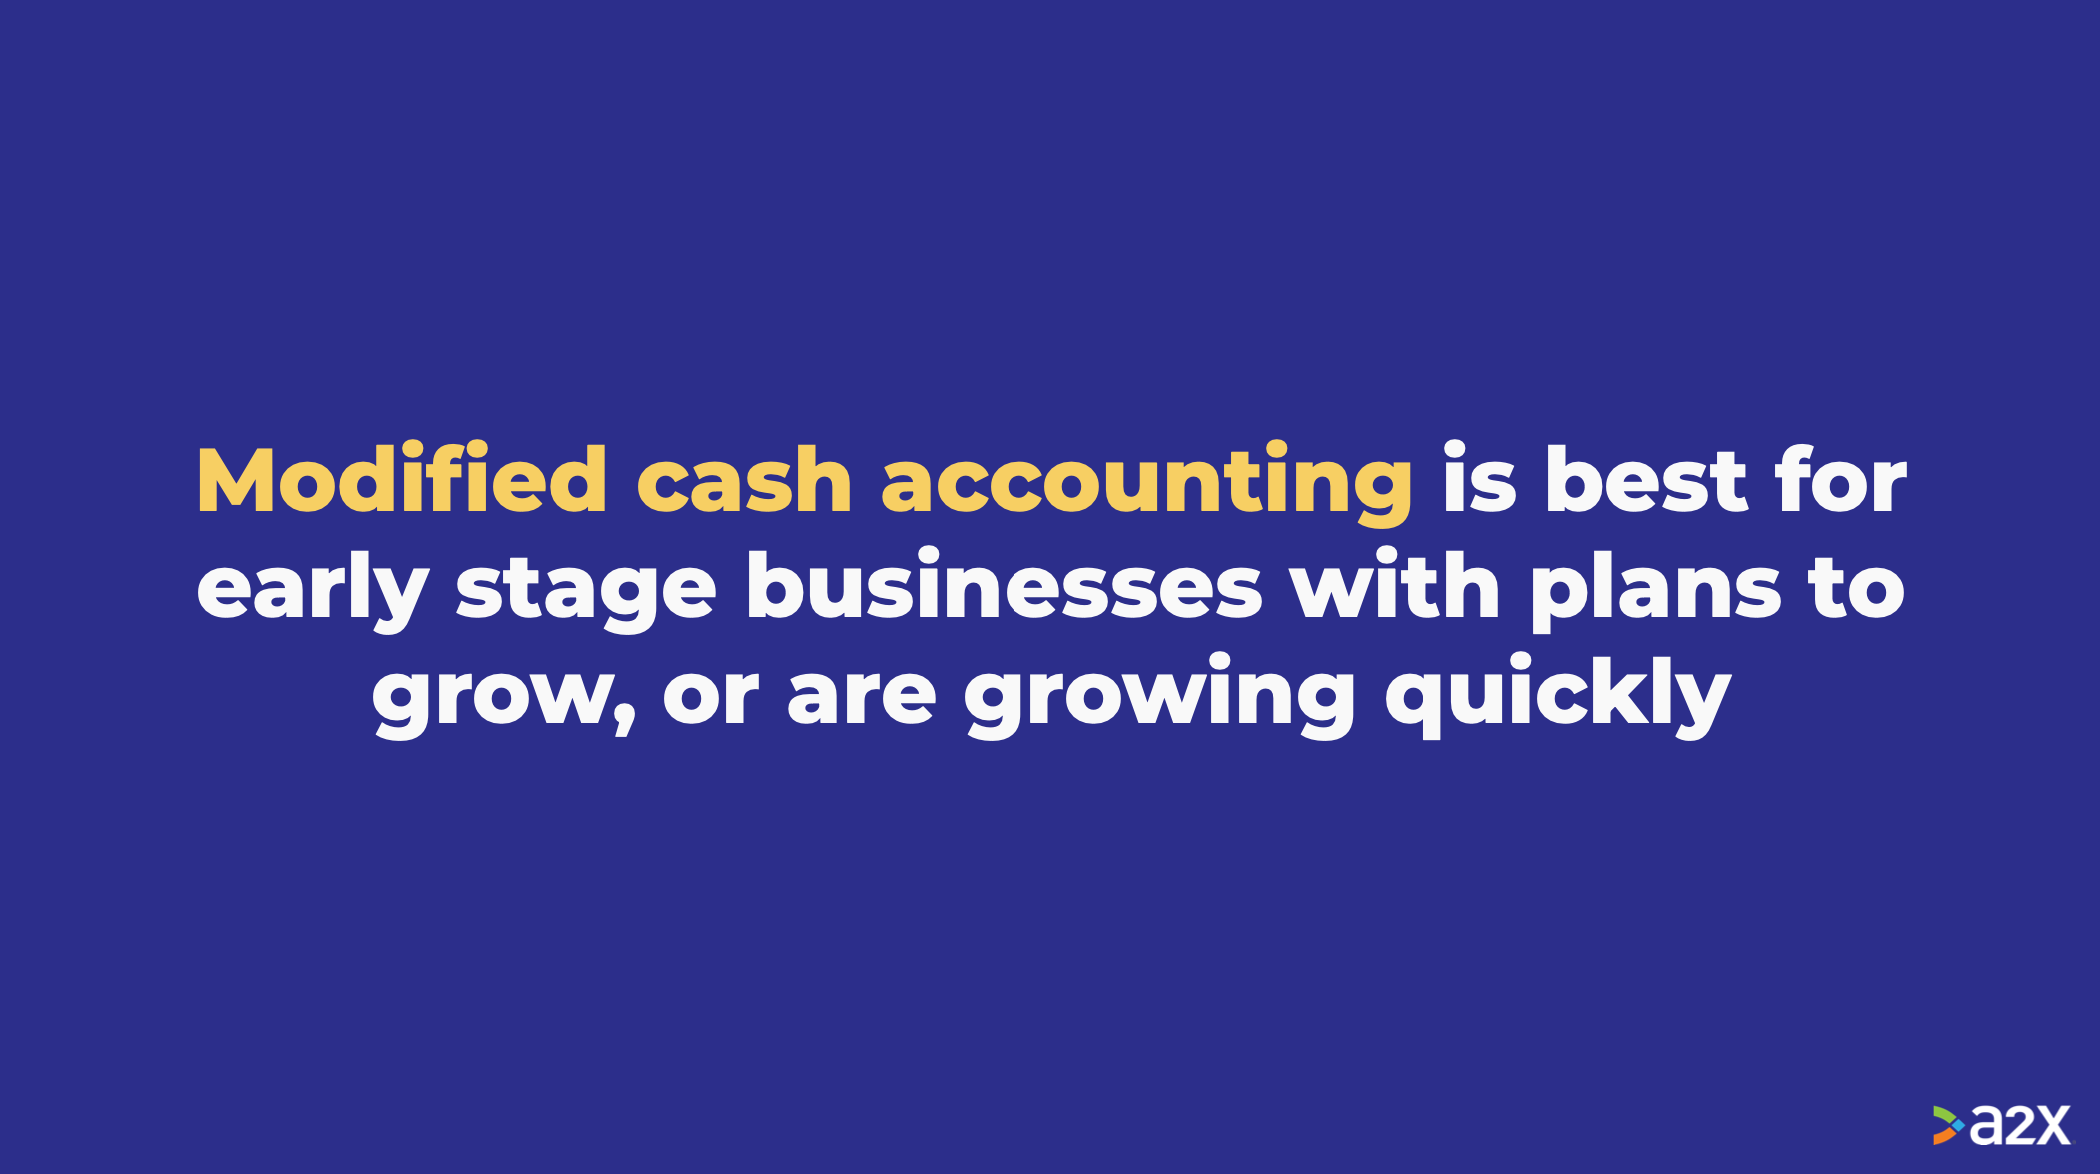 Modified cash is best for businesses doing more than $100k and under $25 million in revenue